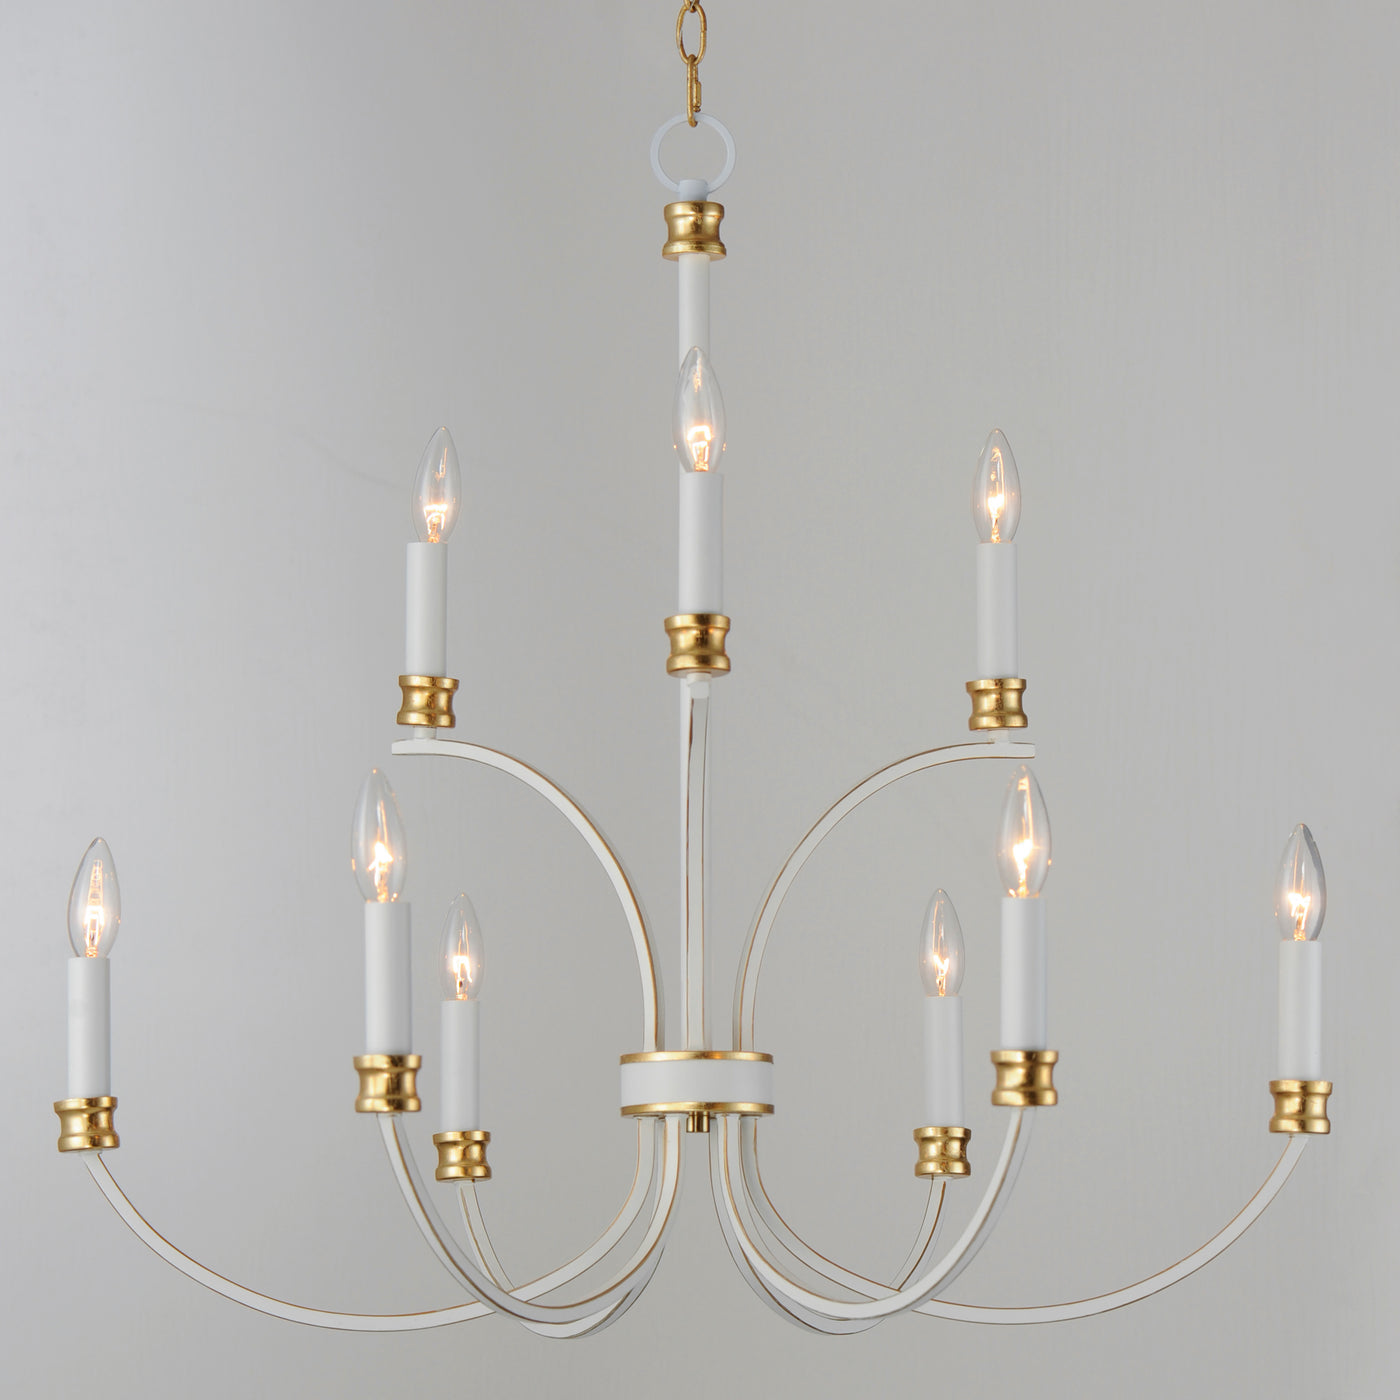 Steel Curve Arms Chandelier